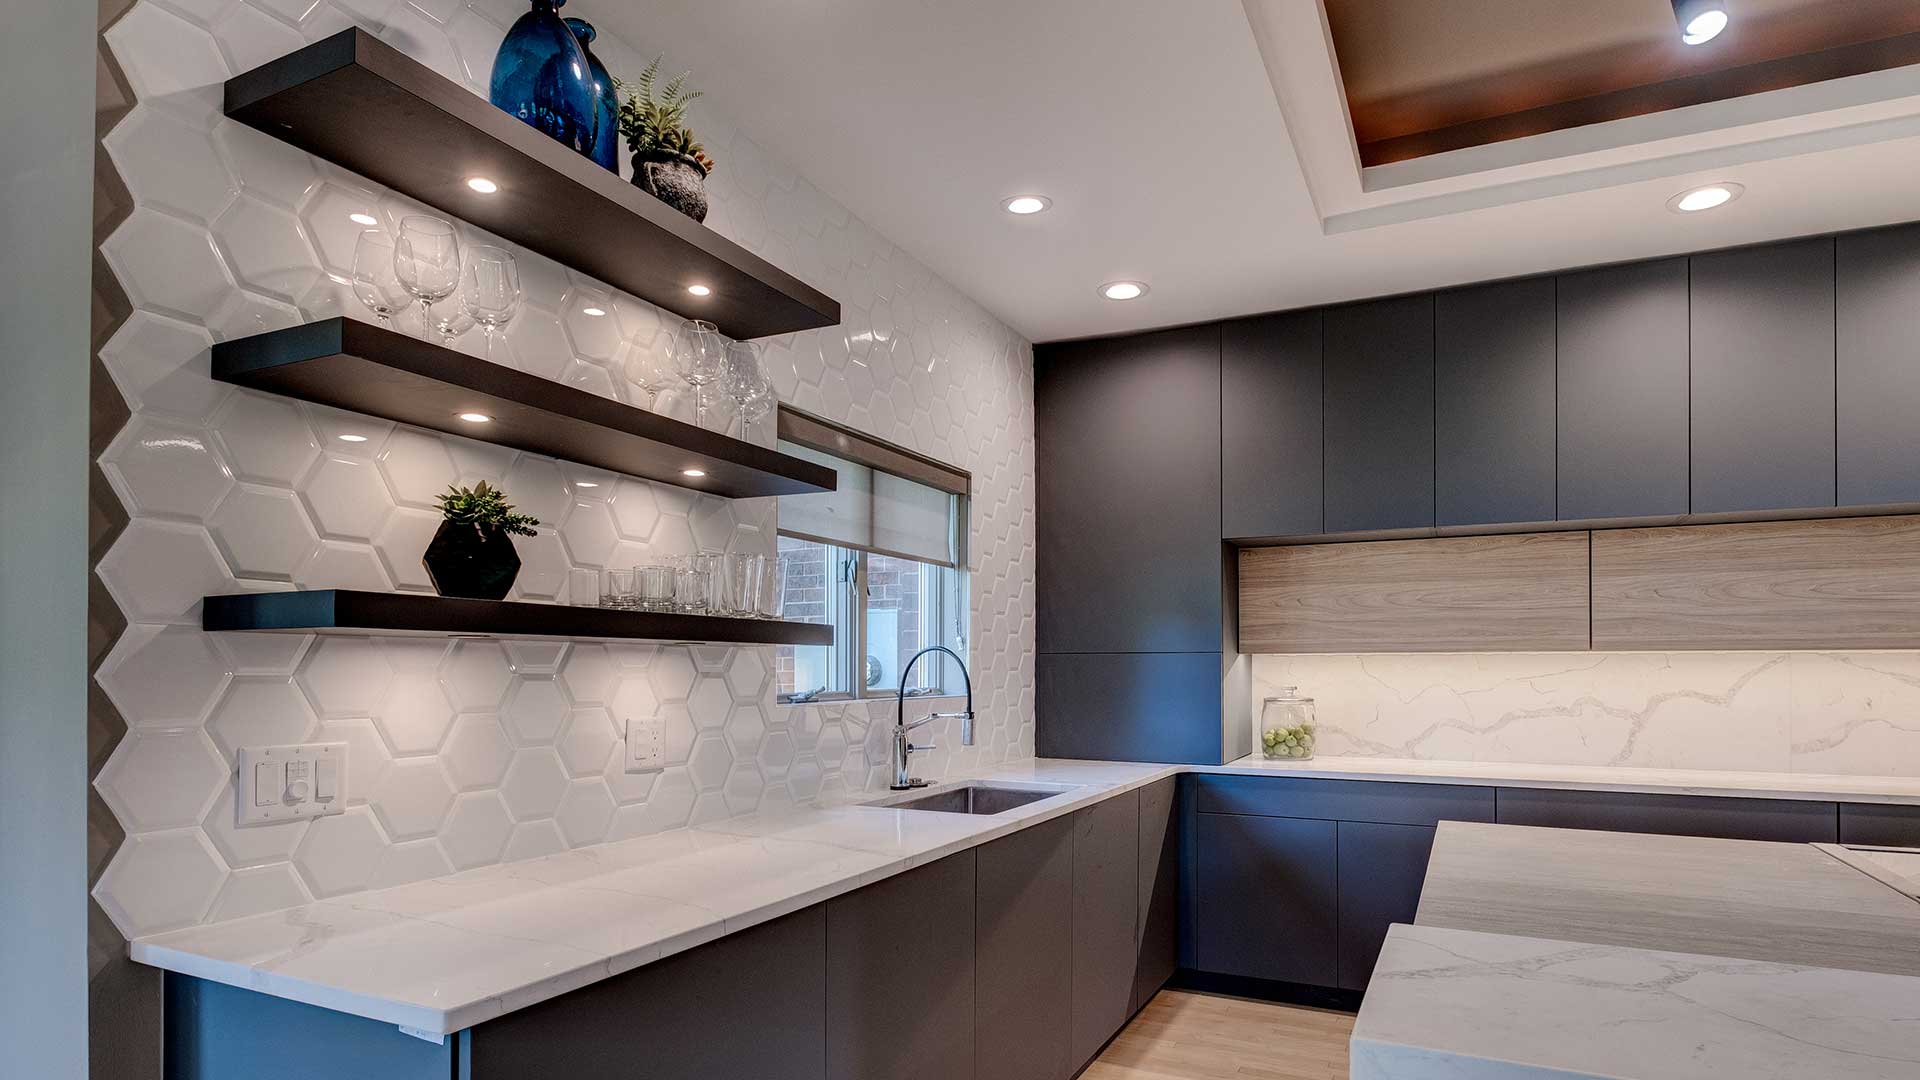 Modern Kitchen design with custom cabinetry shelving